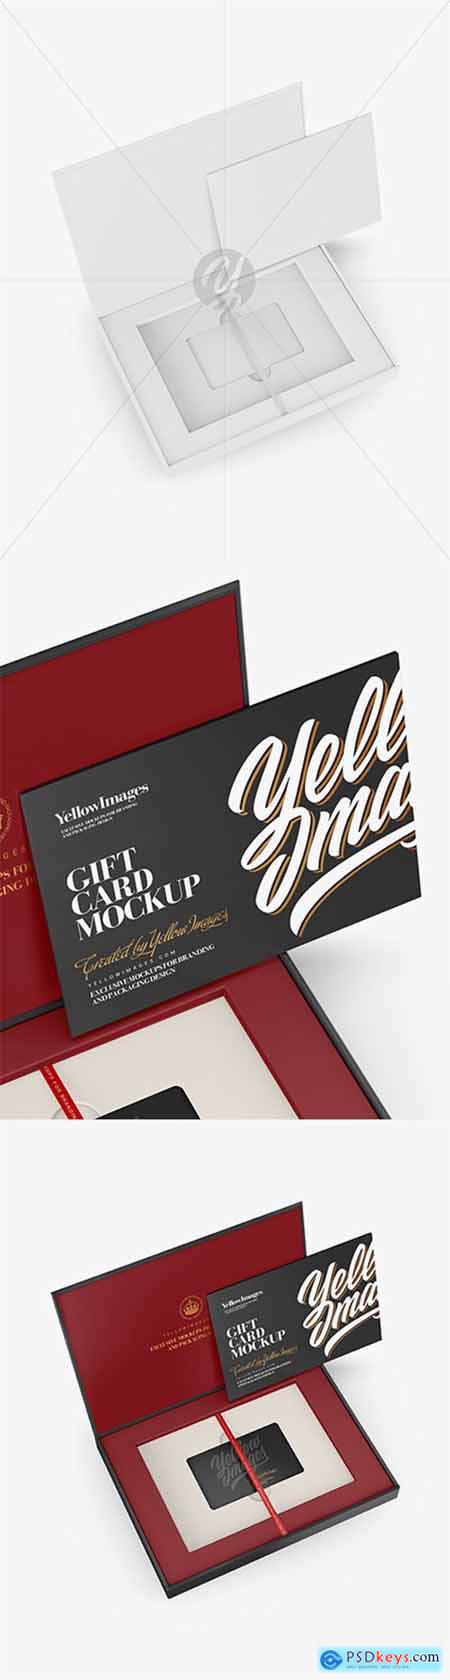 Download Gift Card In A Box Mockup Halfside View High Angle Shot 23539 Free Download Photoshop Vector Stock Image Via Torrent Zippyshare From Psdkeys Com Yellowimages Mockups